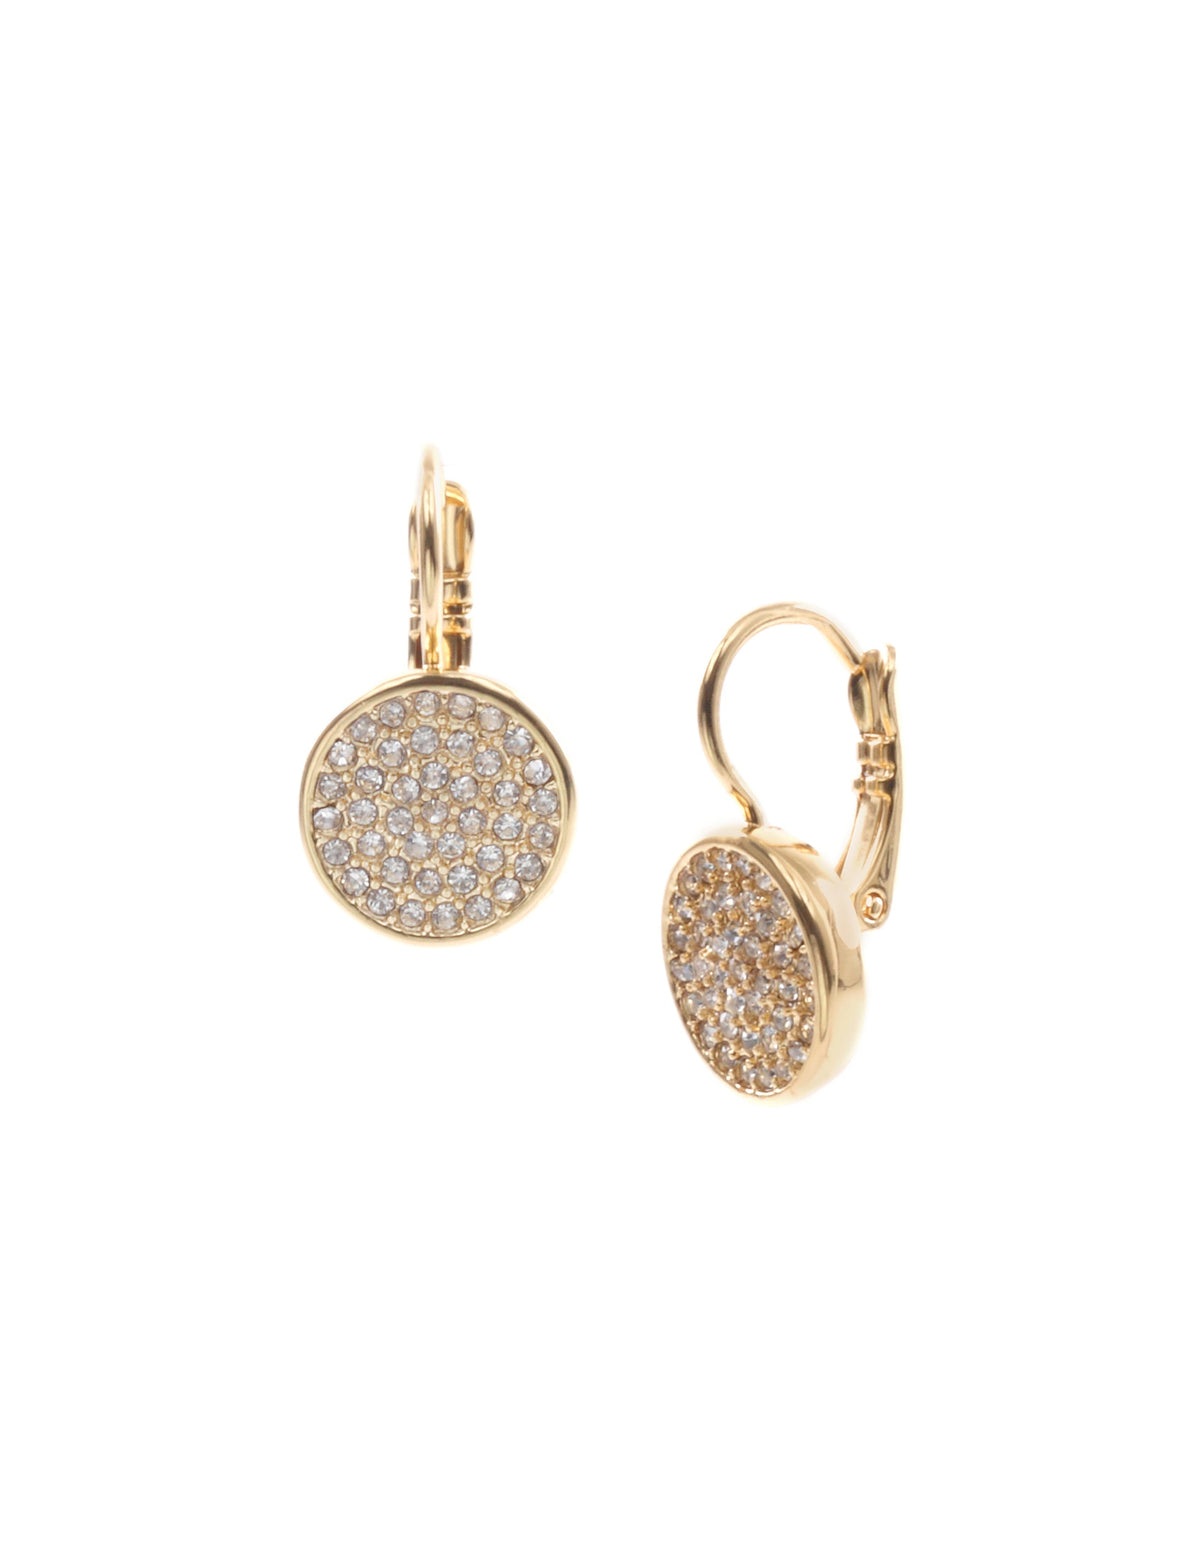 Anne Klein Gold Tone Gold Pave Drop Earrings